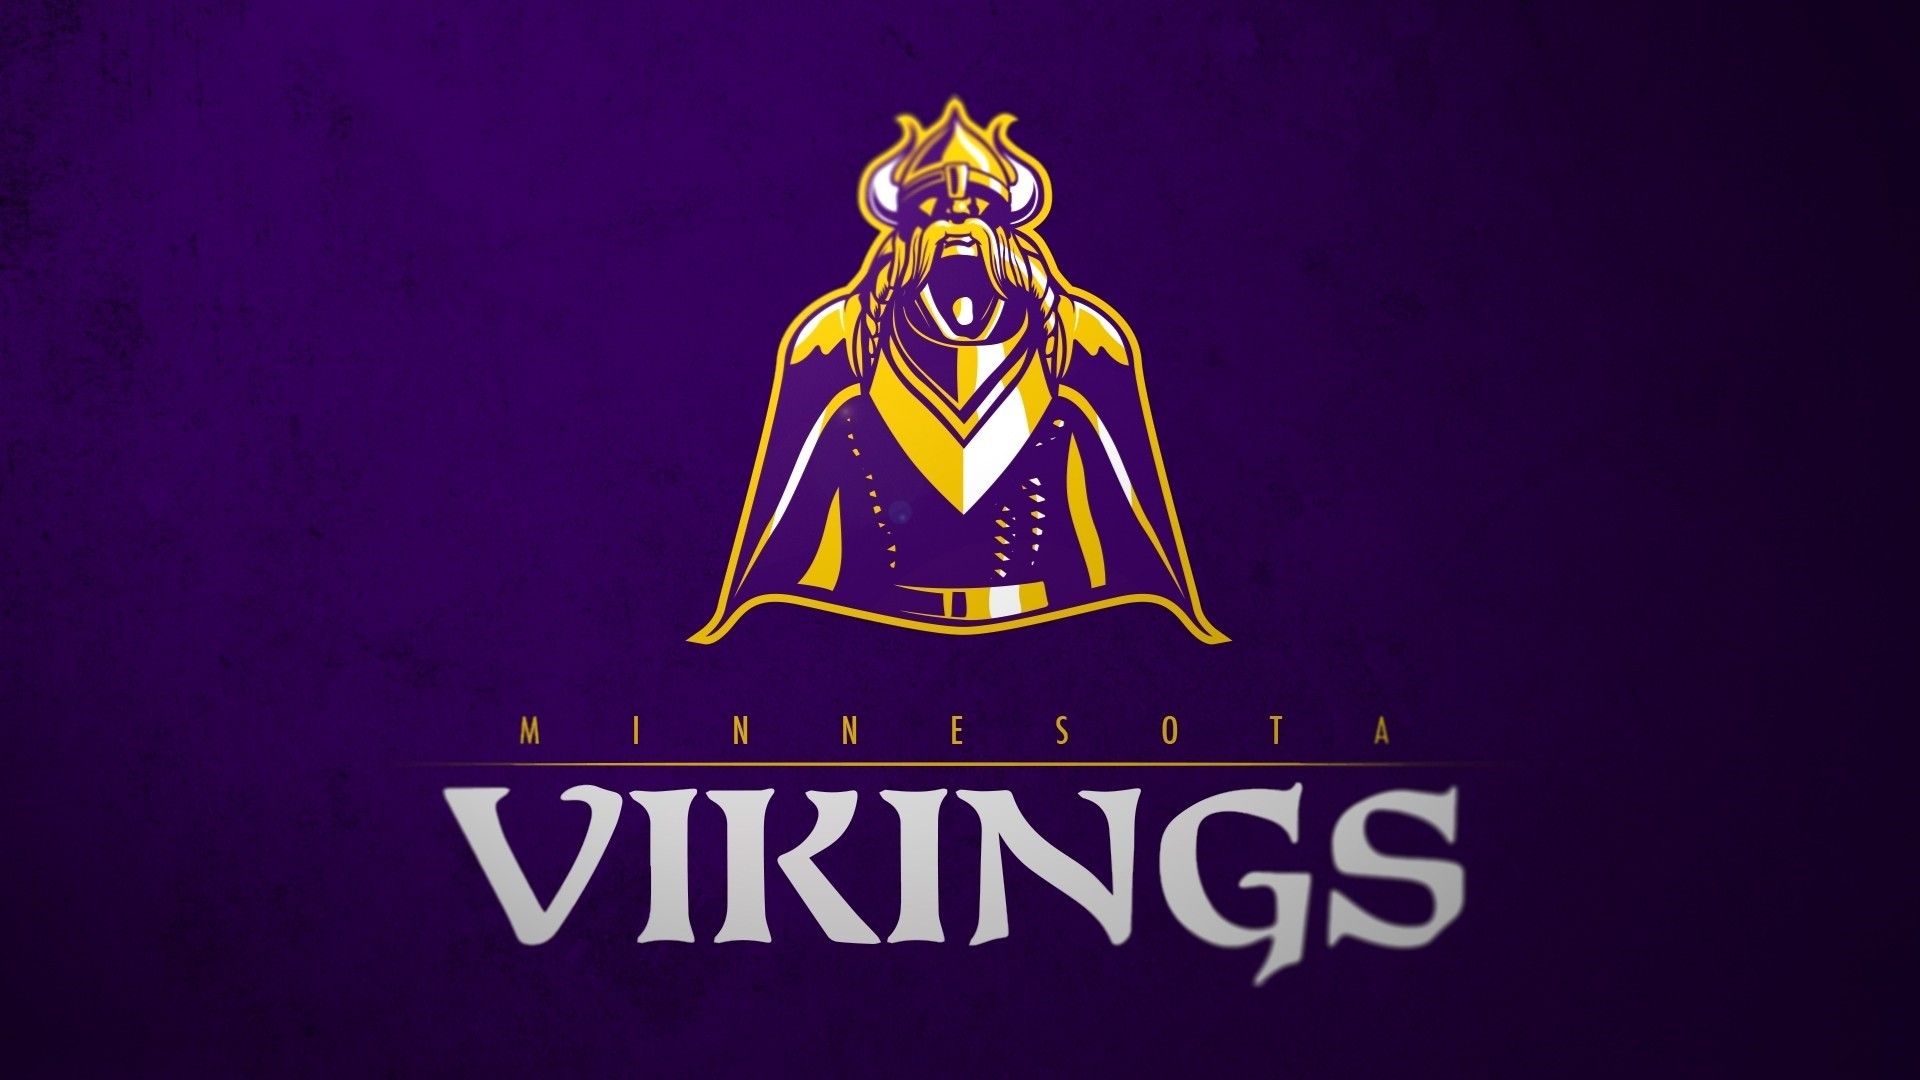 1920x1080 Minnesota Vikings Desktop Wallpaper with resolution  pixel. You  can make this wallpaper for your